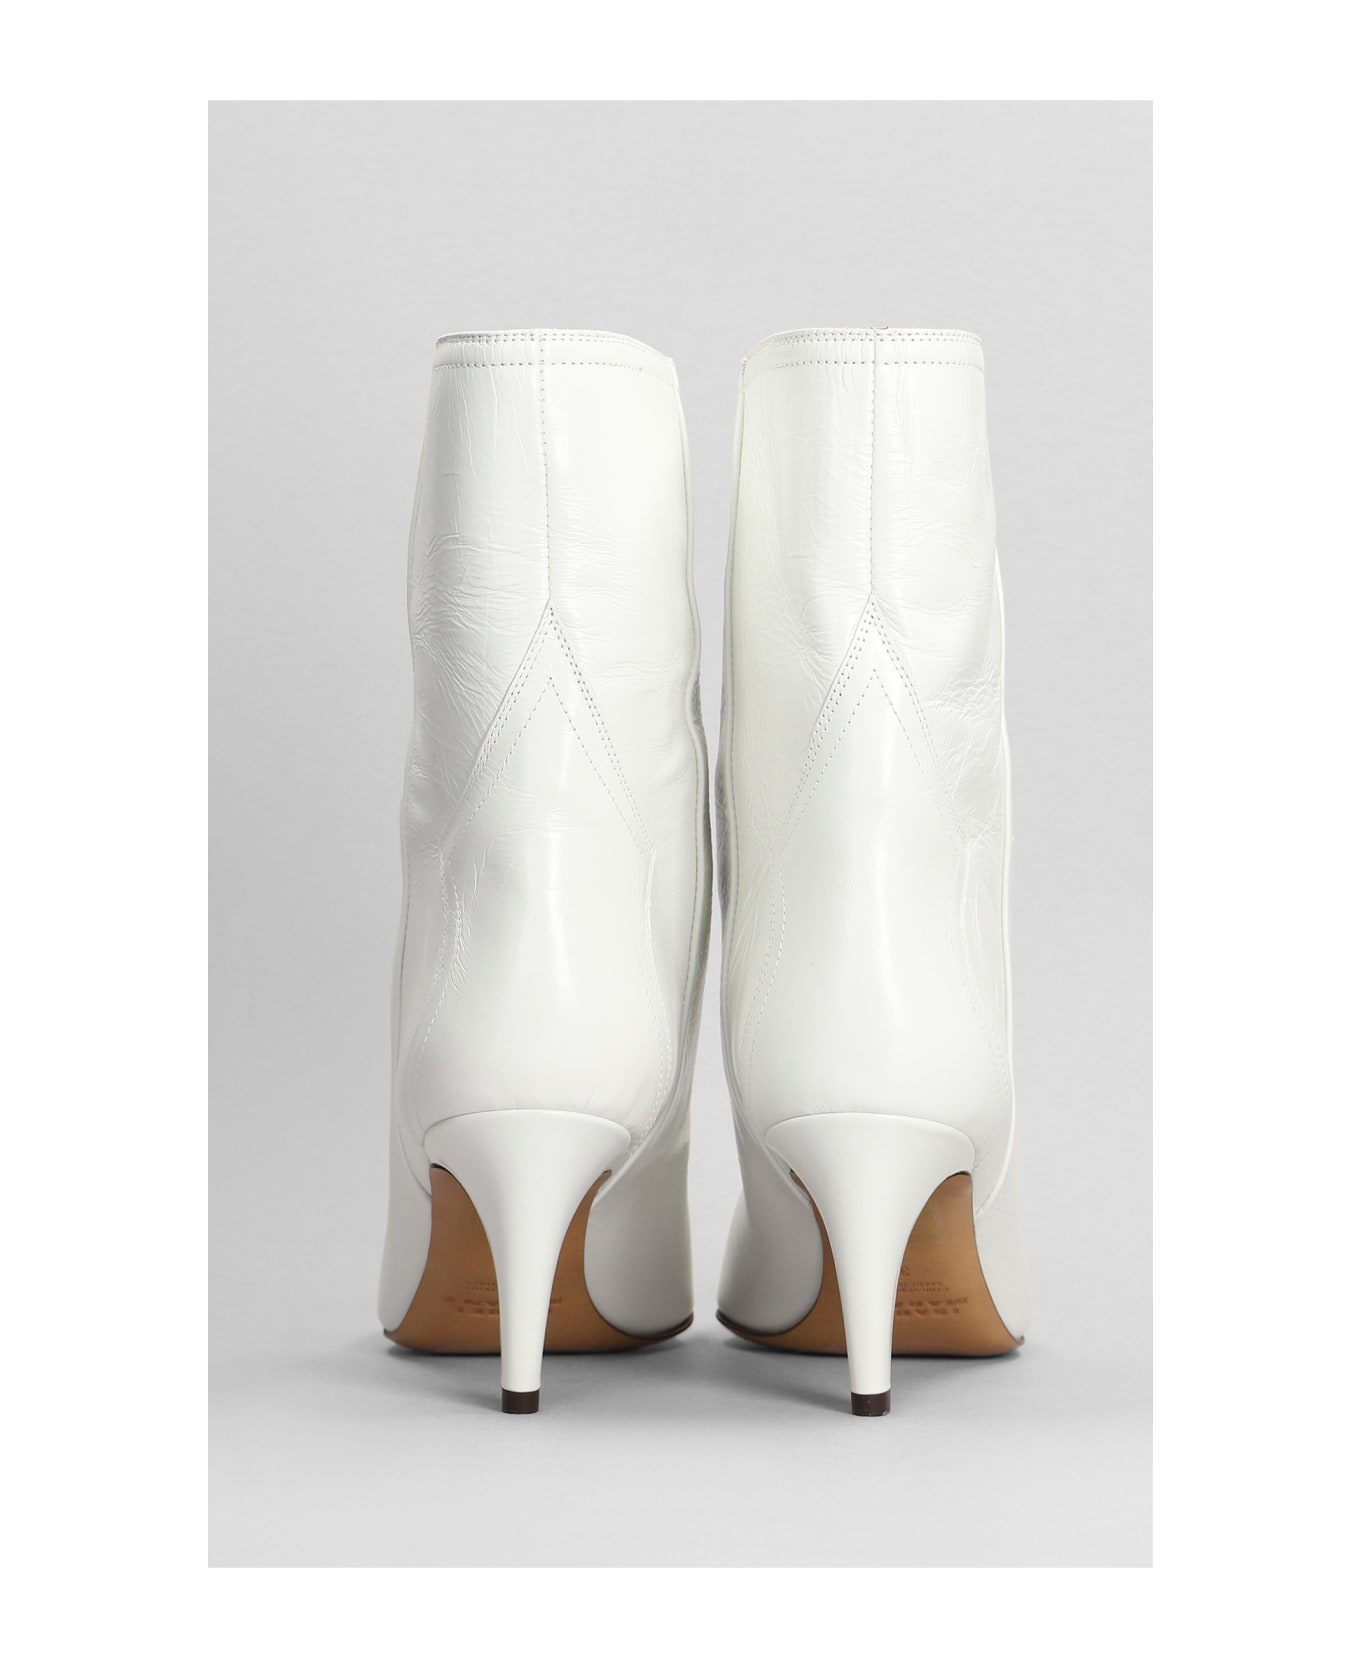 Isabel Marant Dytho High Heels Ankle Boots - WHITE ブーツ